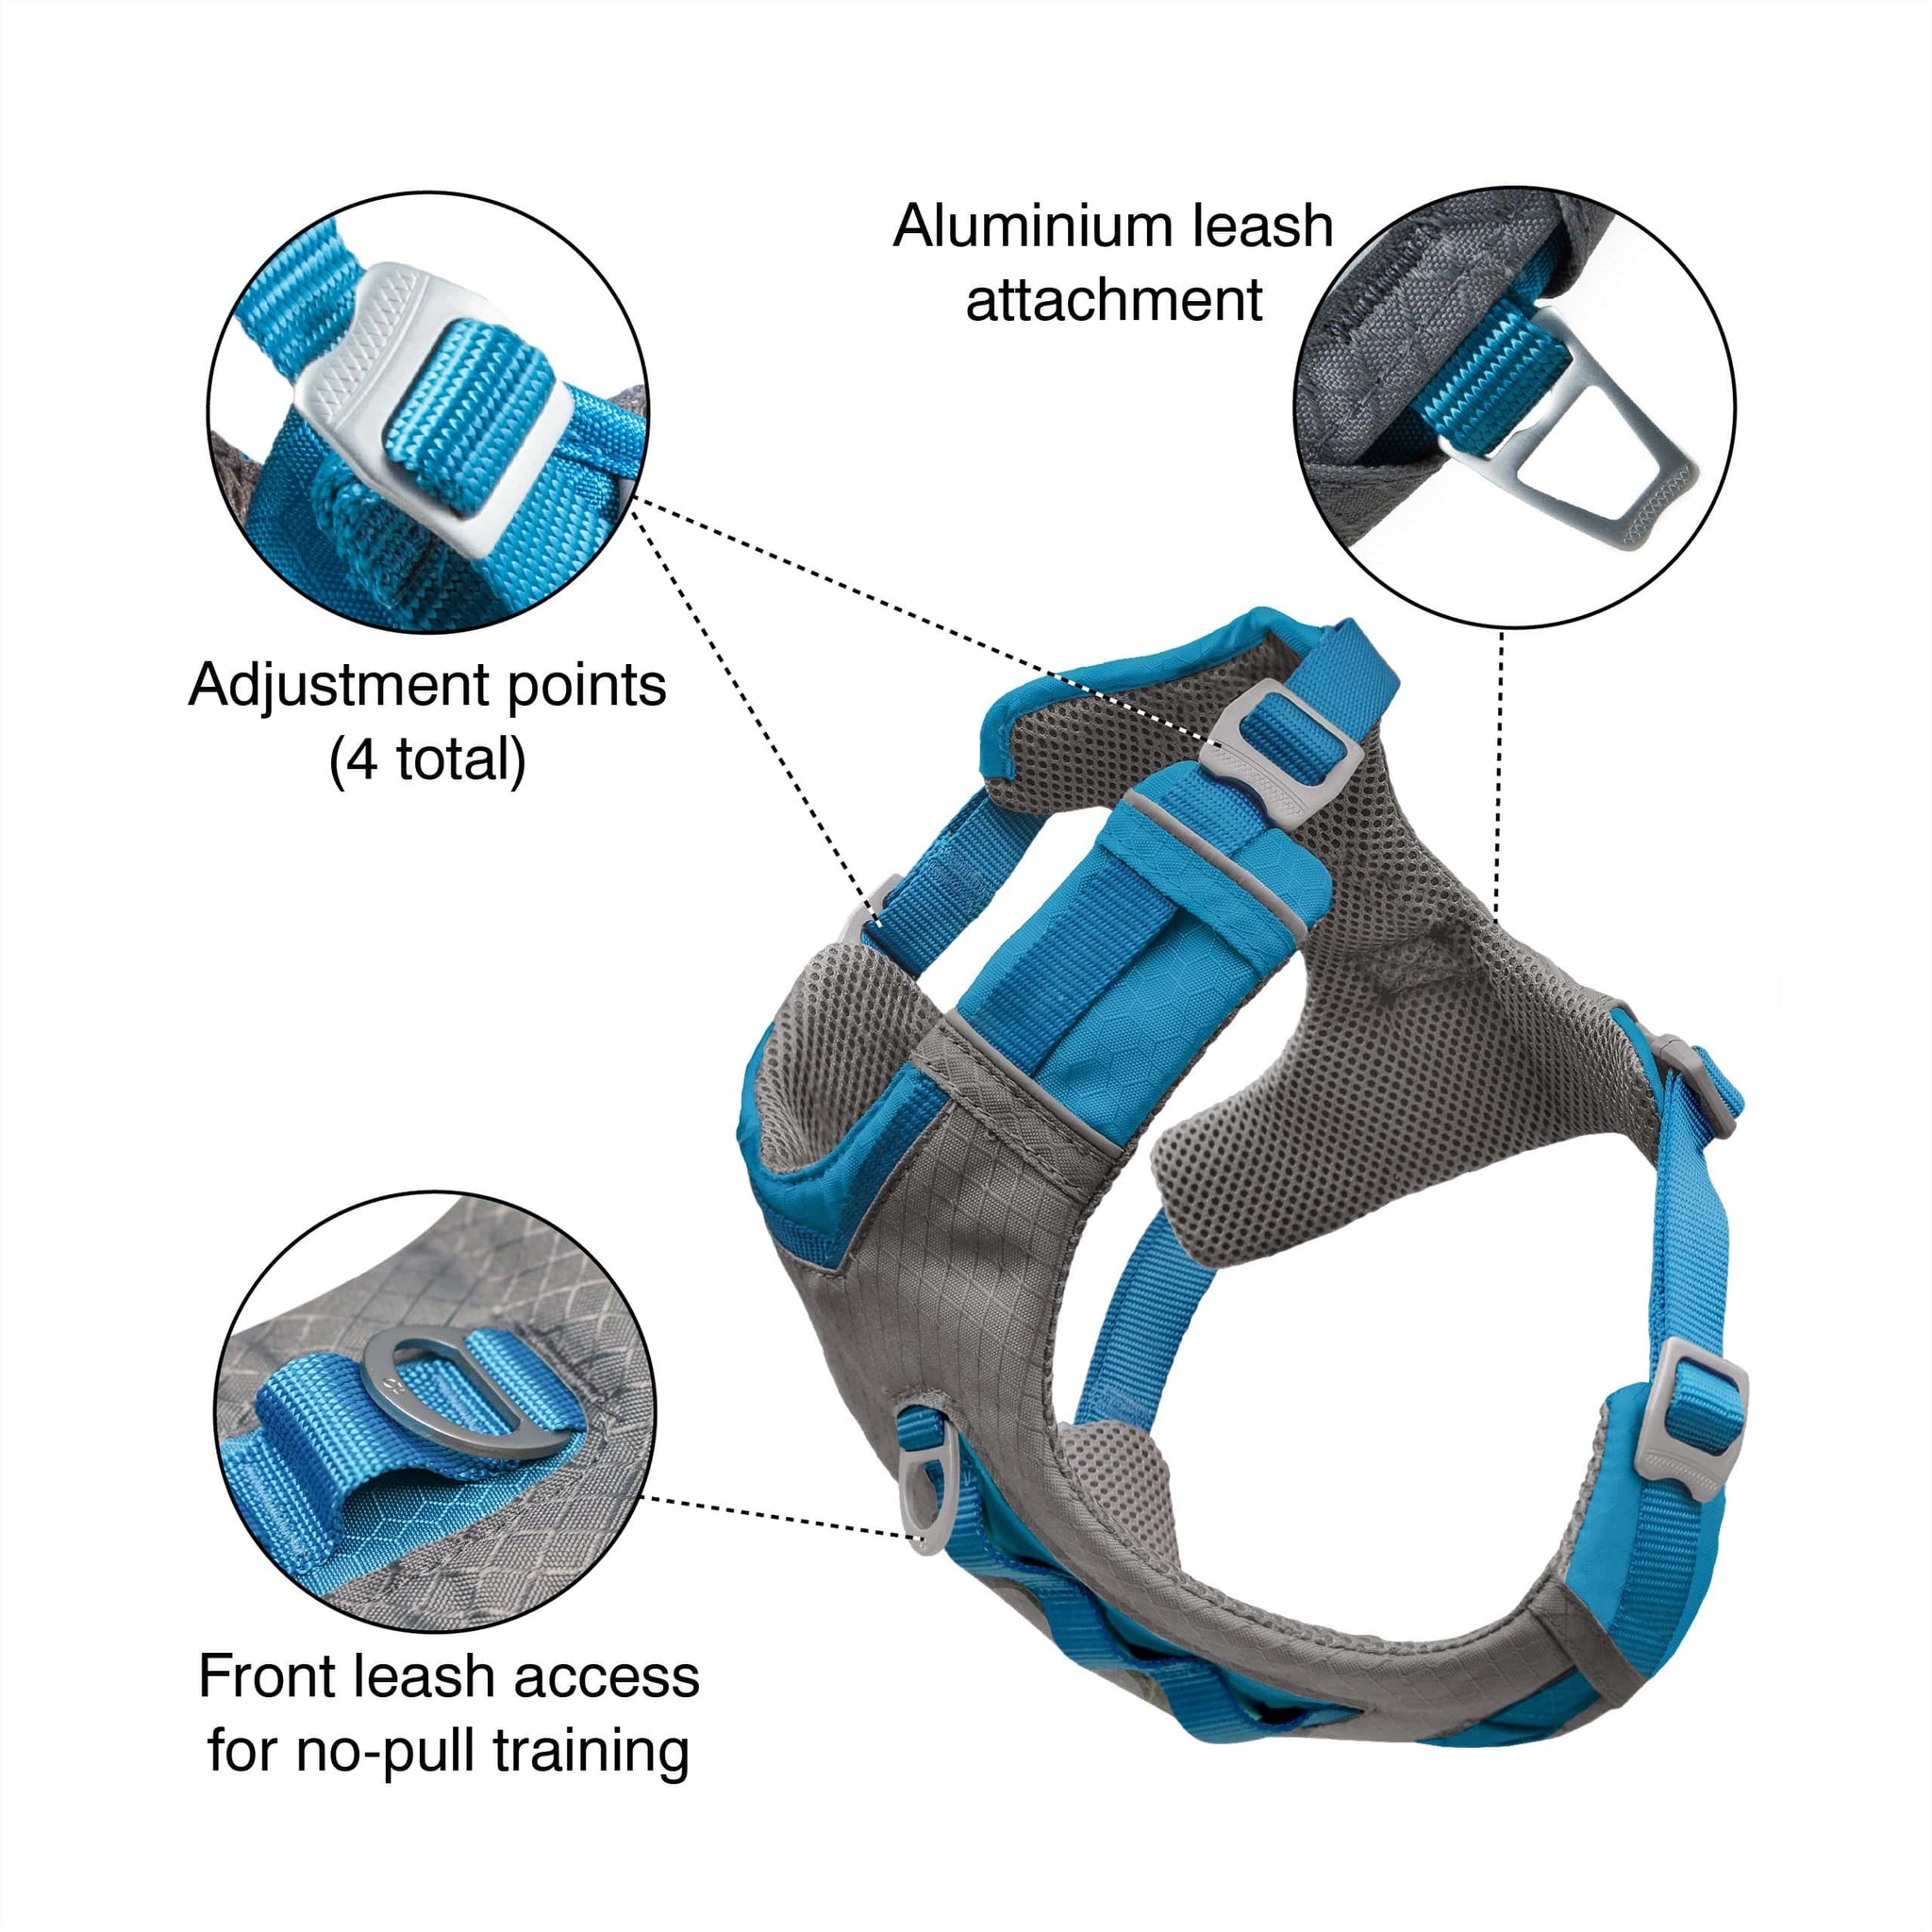 Front and rear leash attachment and adjustment points